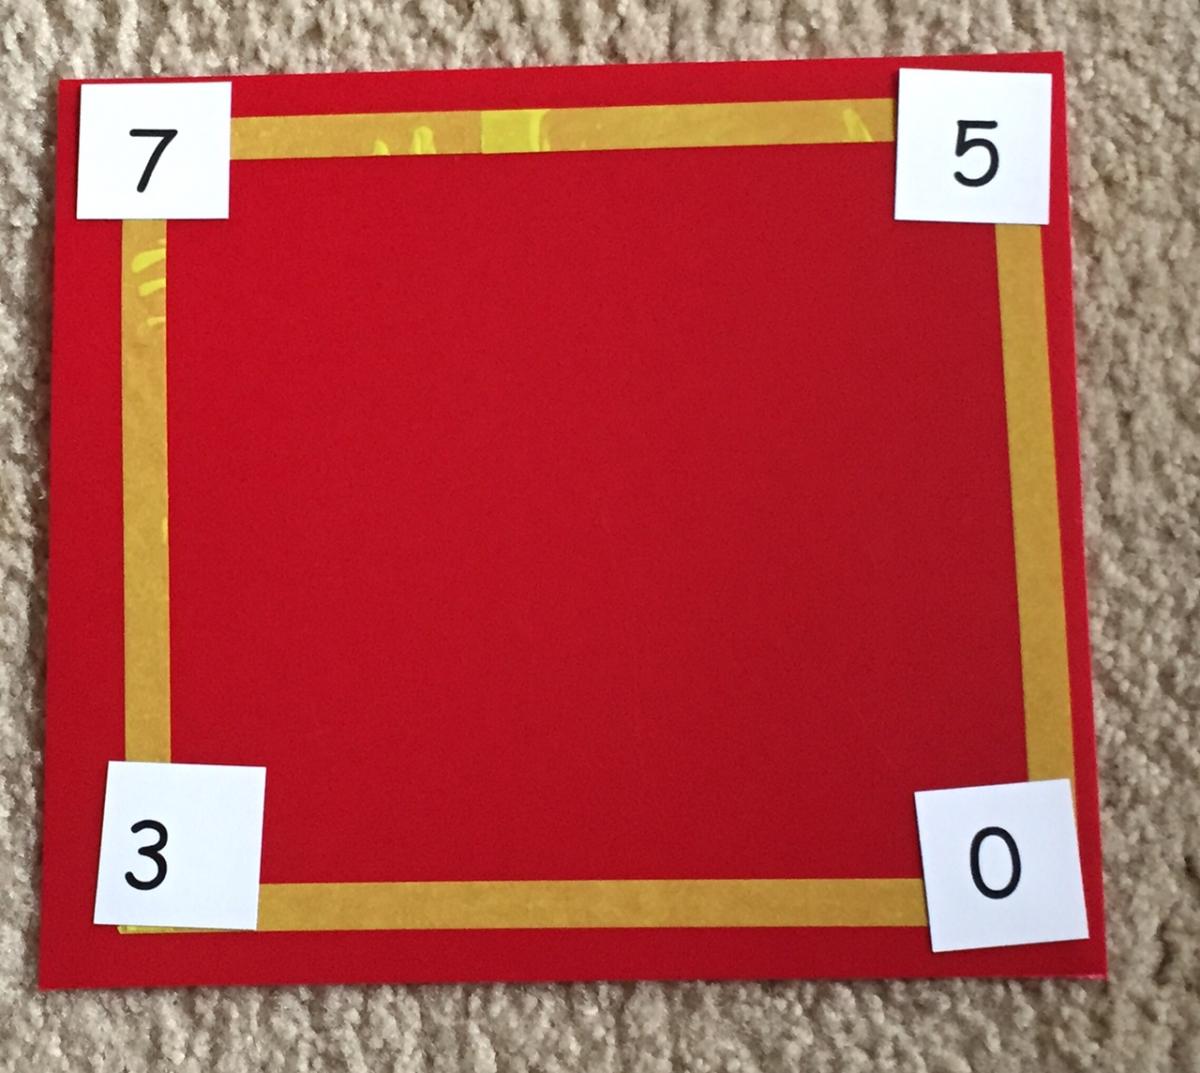 monocular numbers on red background with yellow tape